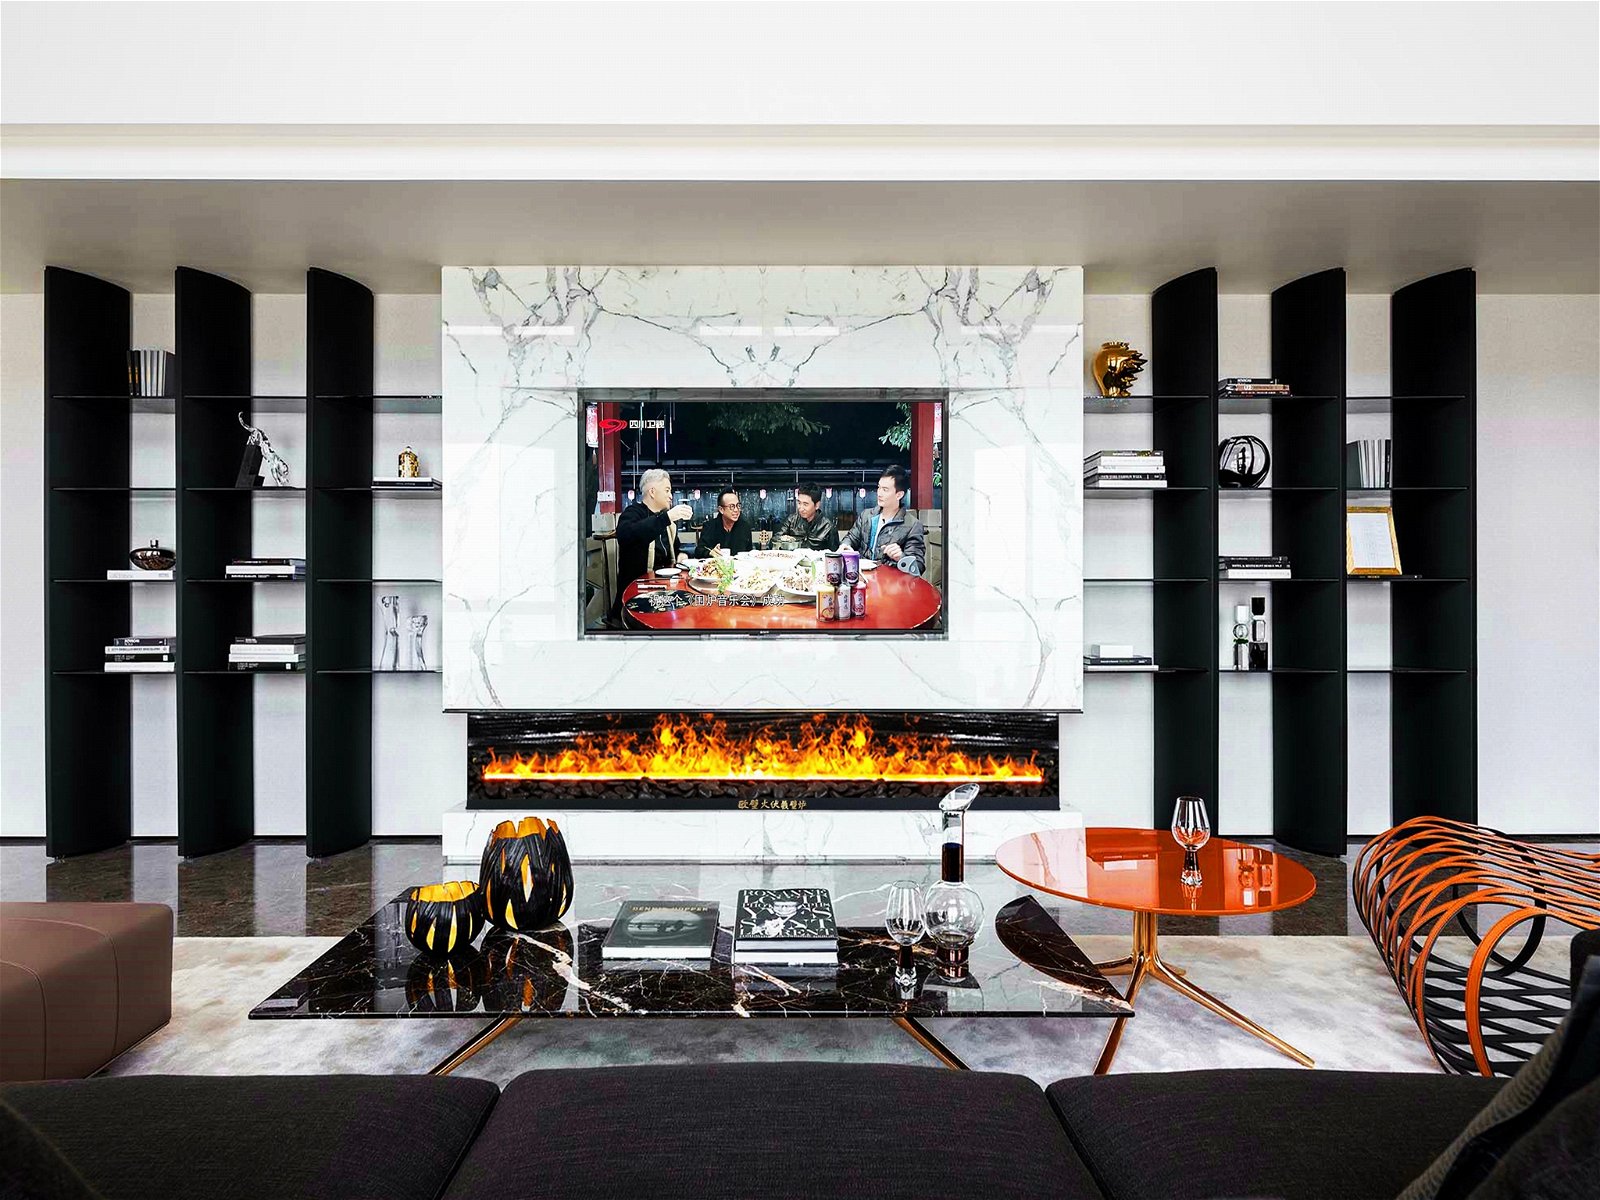 Economic Stock SD fireplace series & Job in Kowloon Tong 5